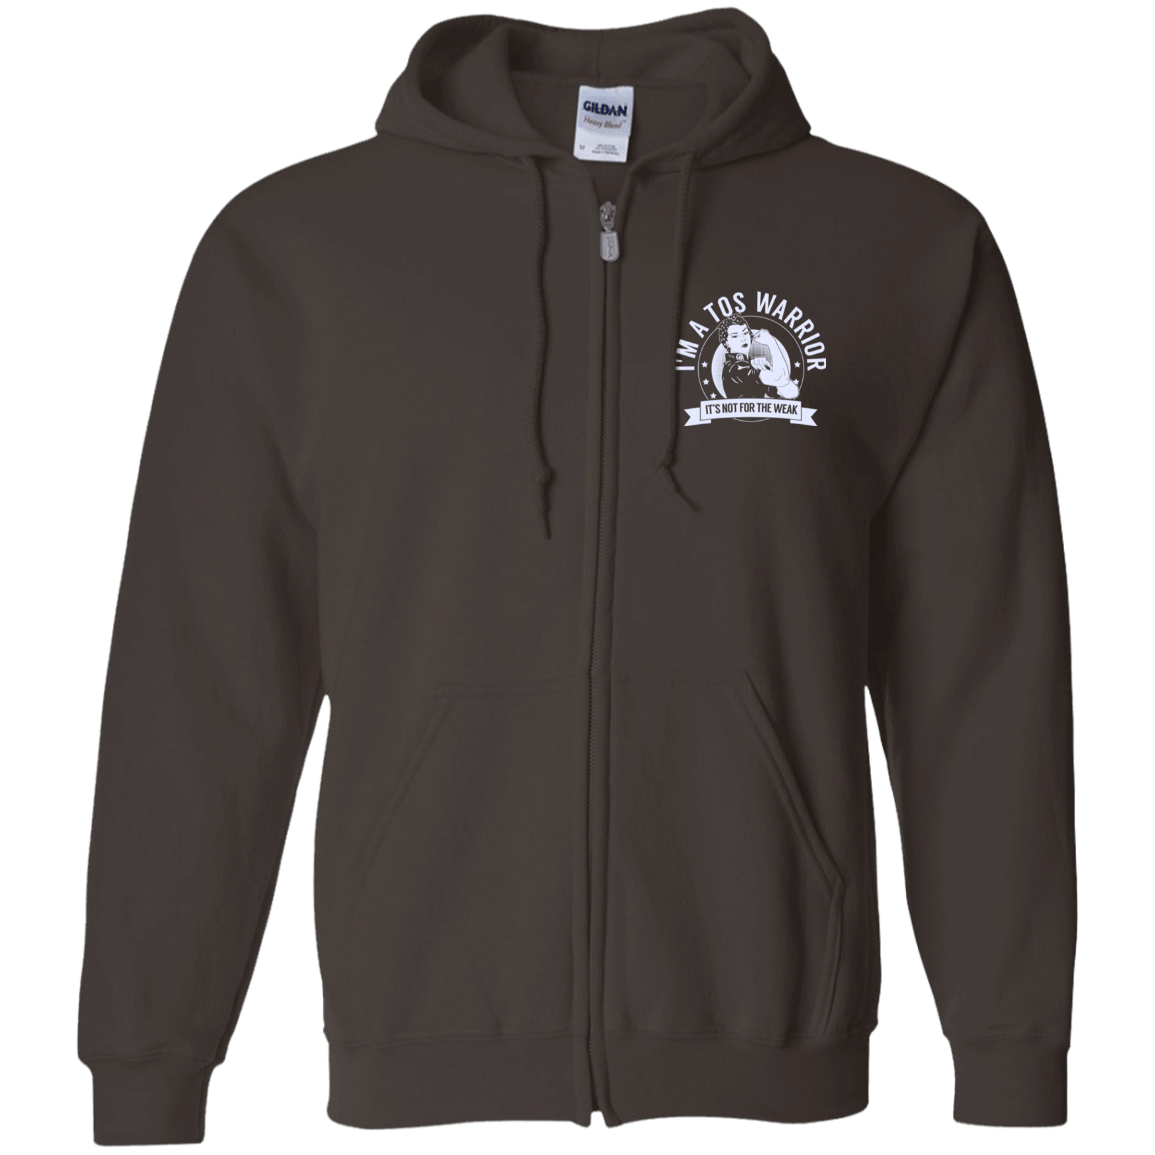 Thoracic Outlet Syndrome - TOS Warrior NFTW Zip Up Hooded Sweatshirt - The Unchargeables